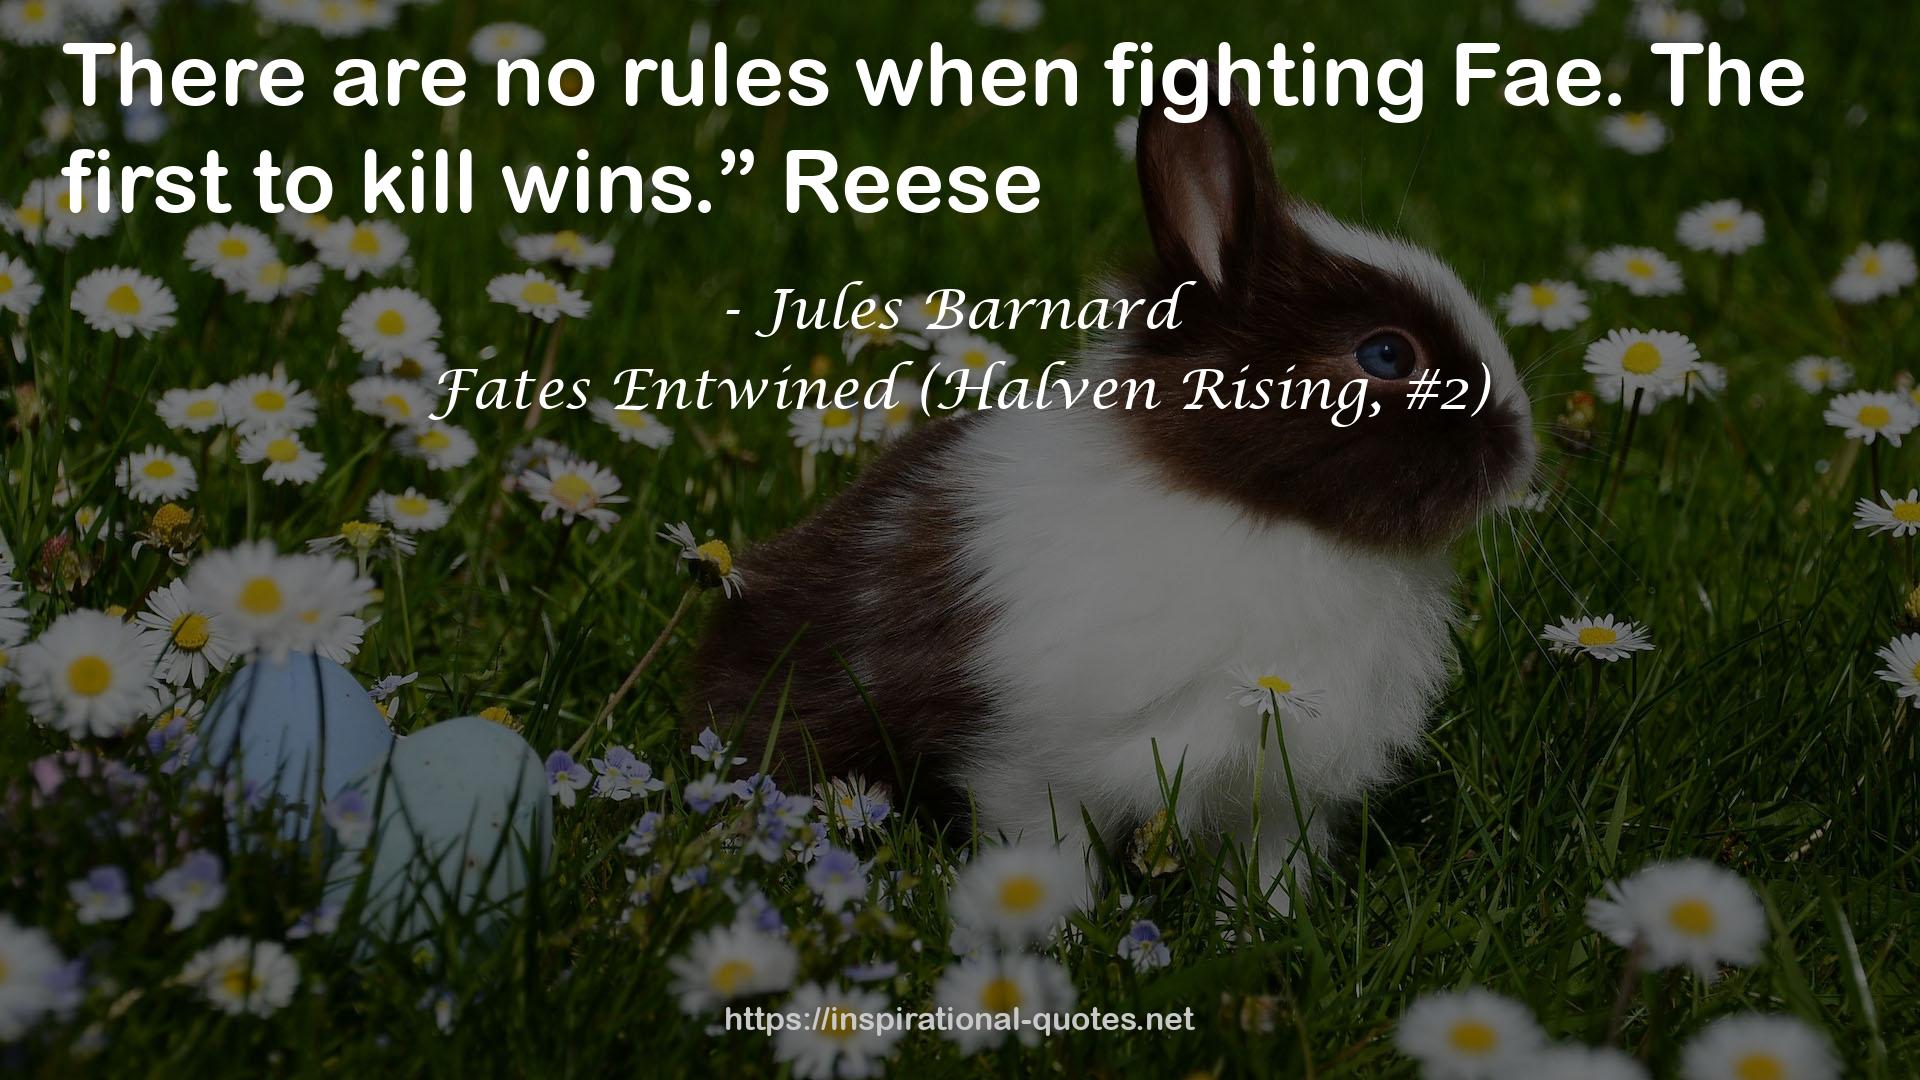 Fates Entwined (Halven Rising, #2) QUOTES